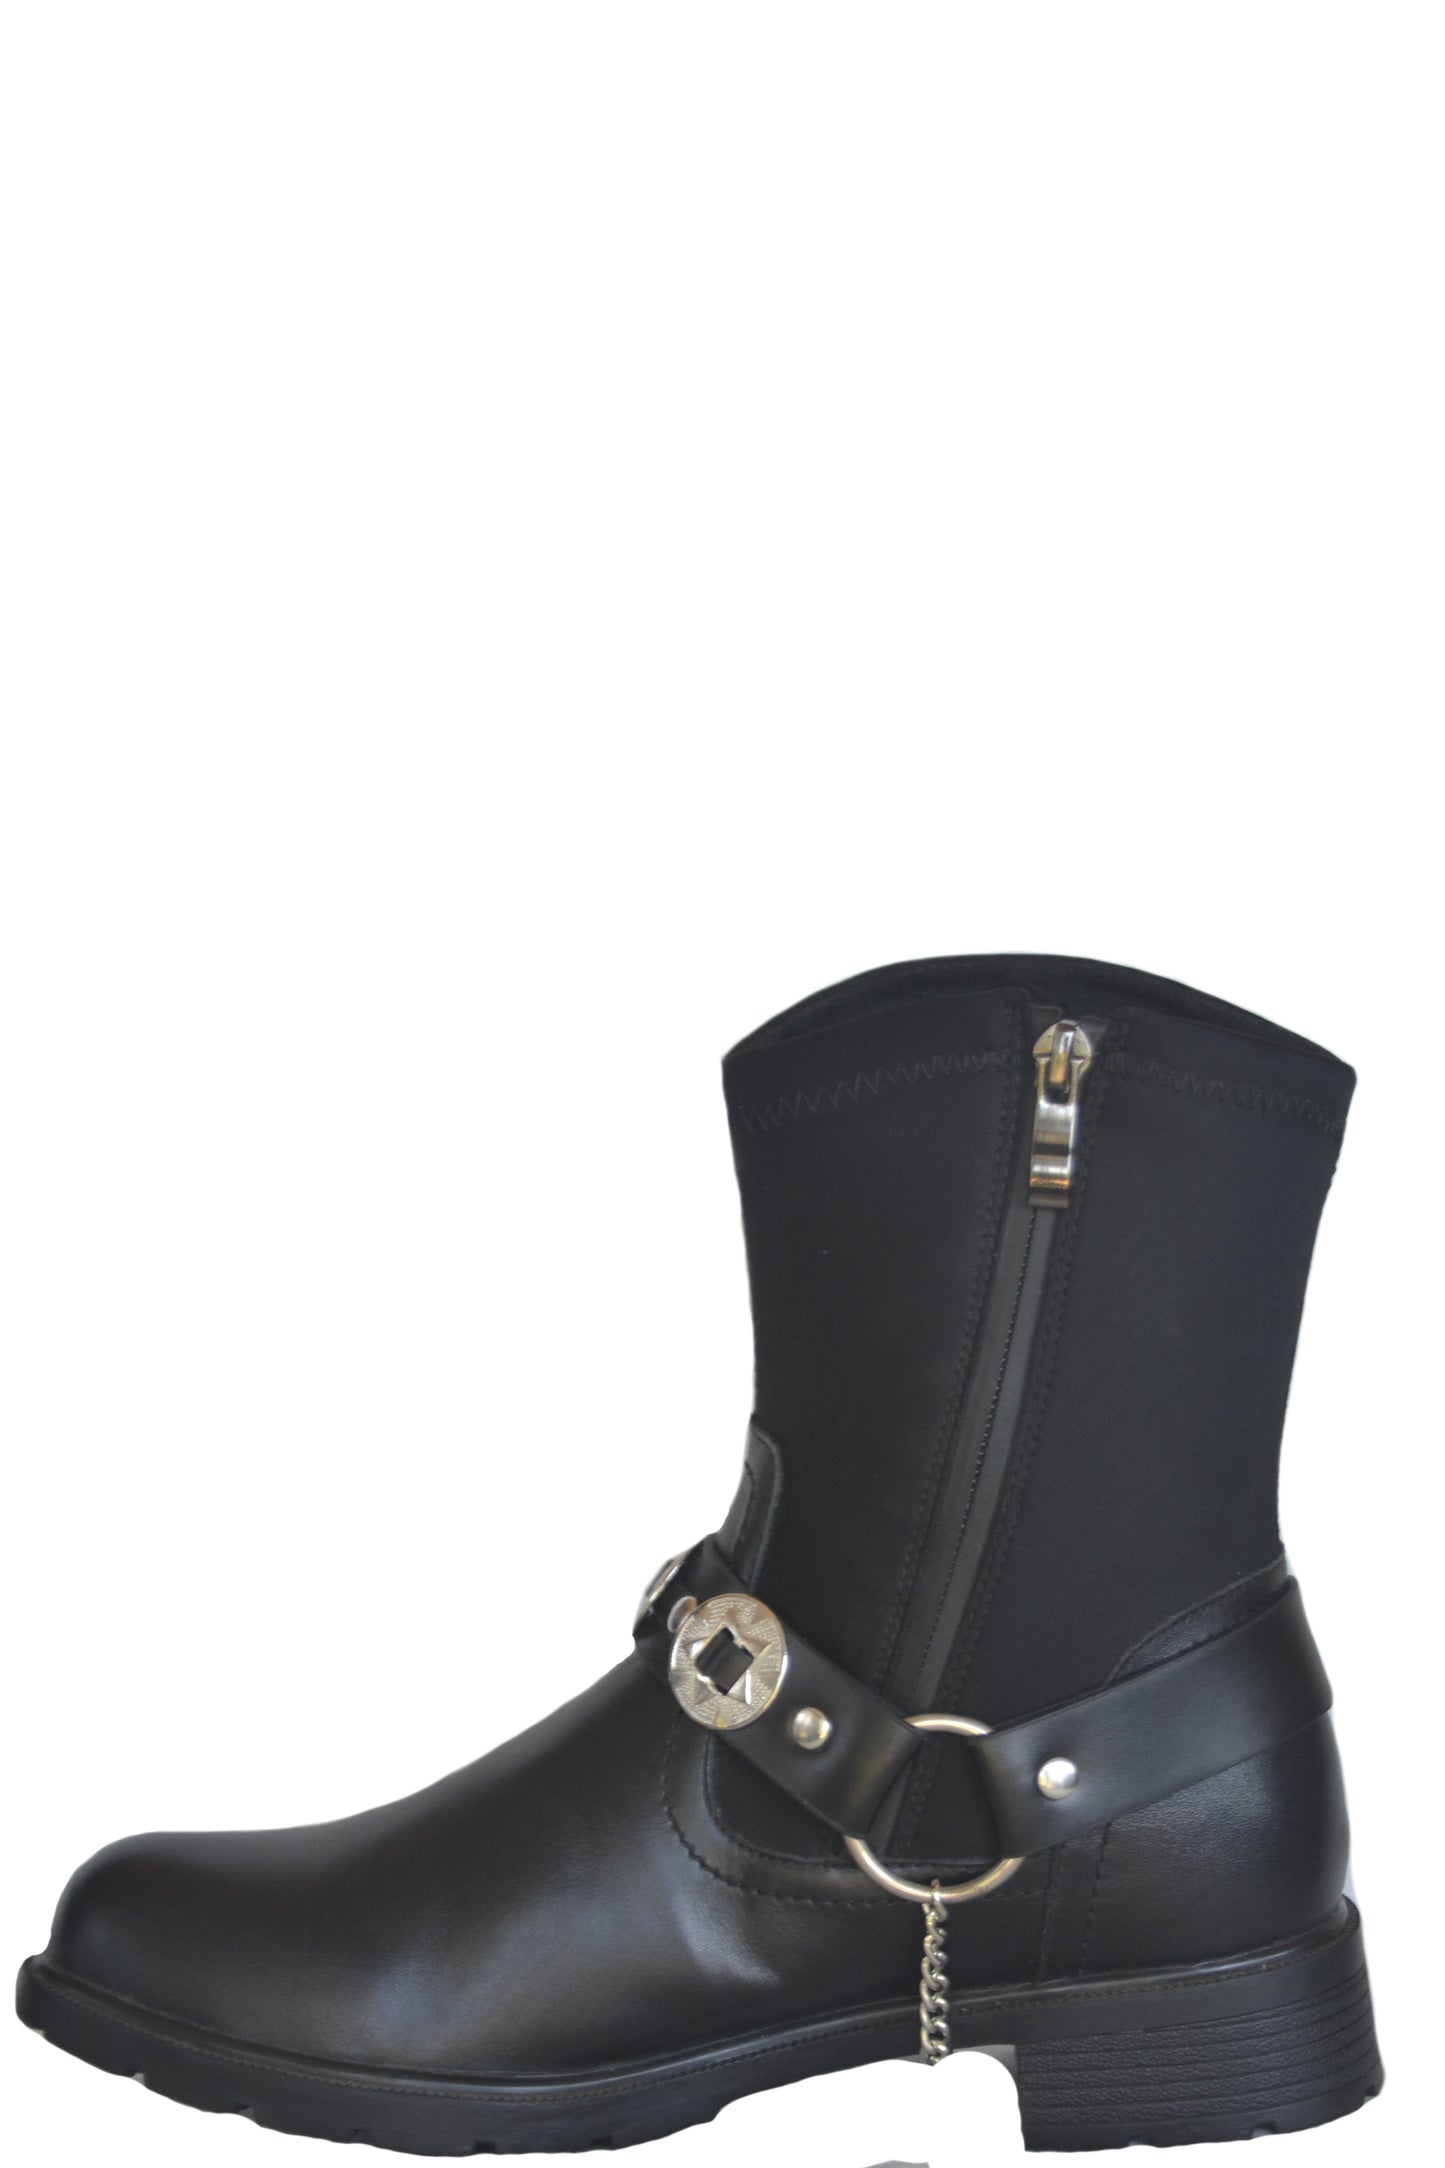 VIRGINIA BREATHABLE WATERPROOF NYLON BOOT WITH CONCHO BELT